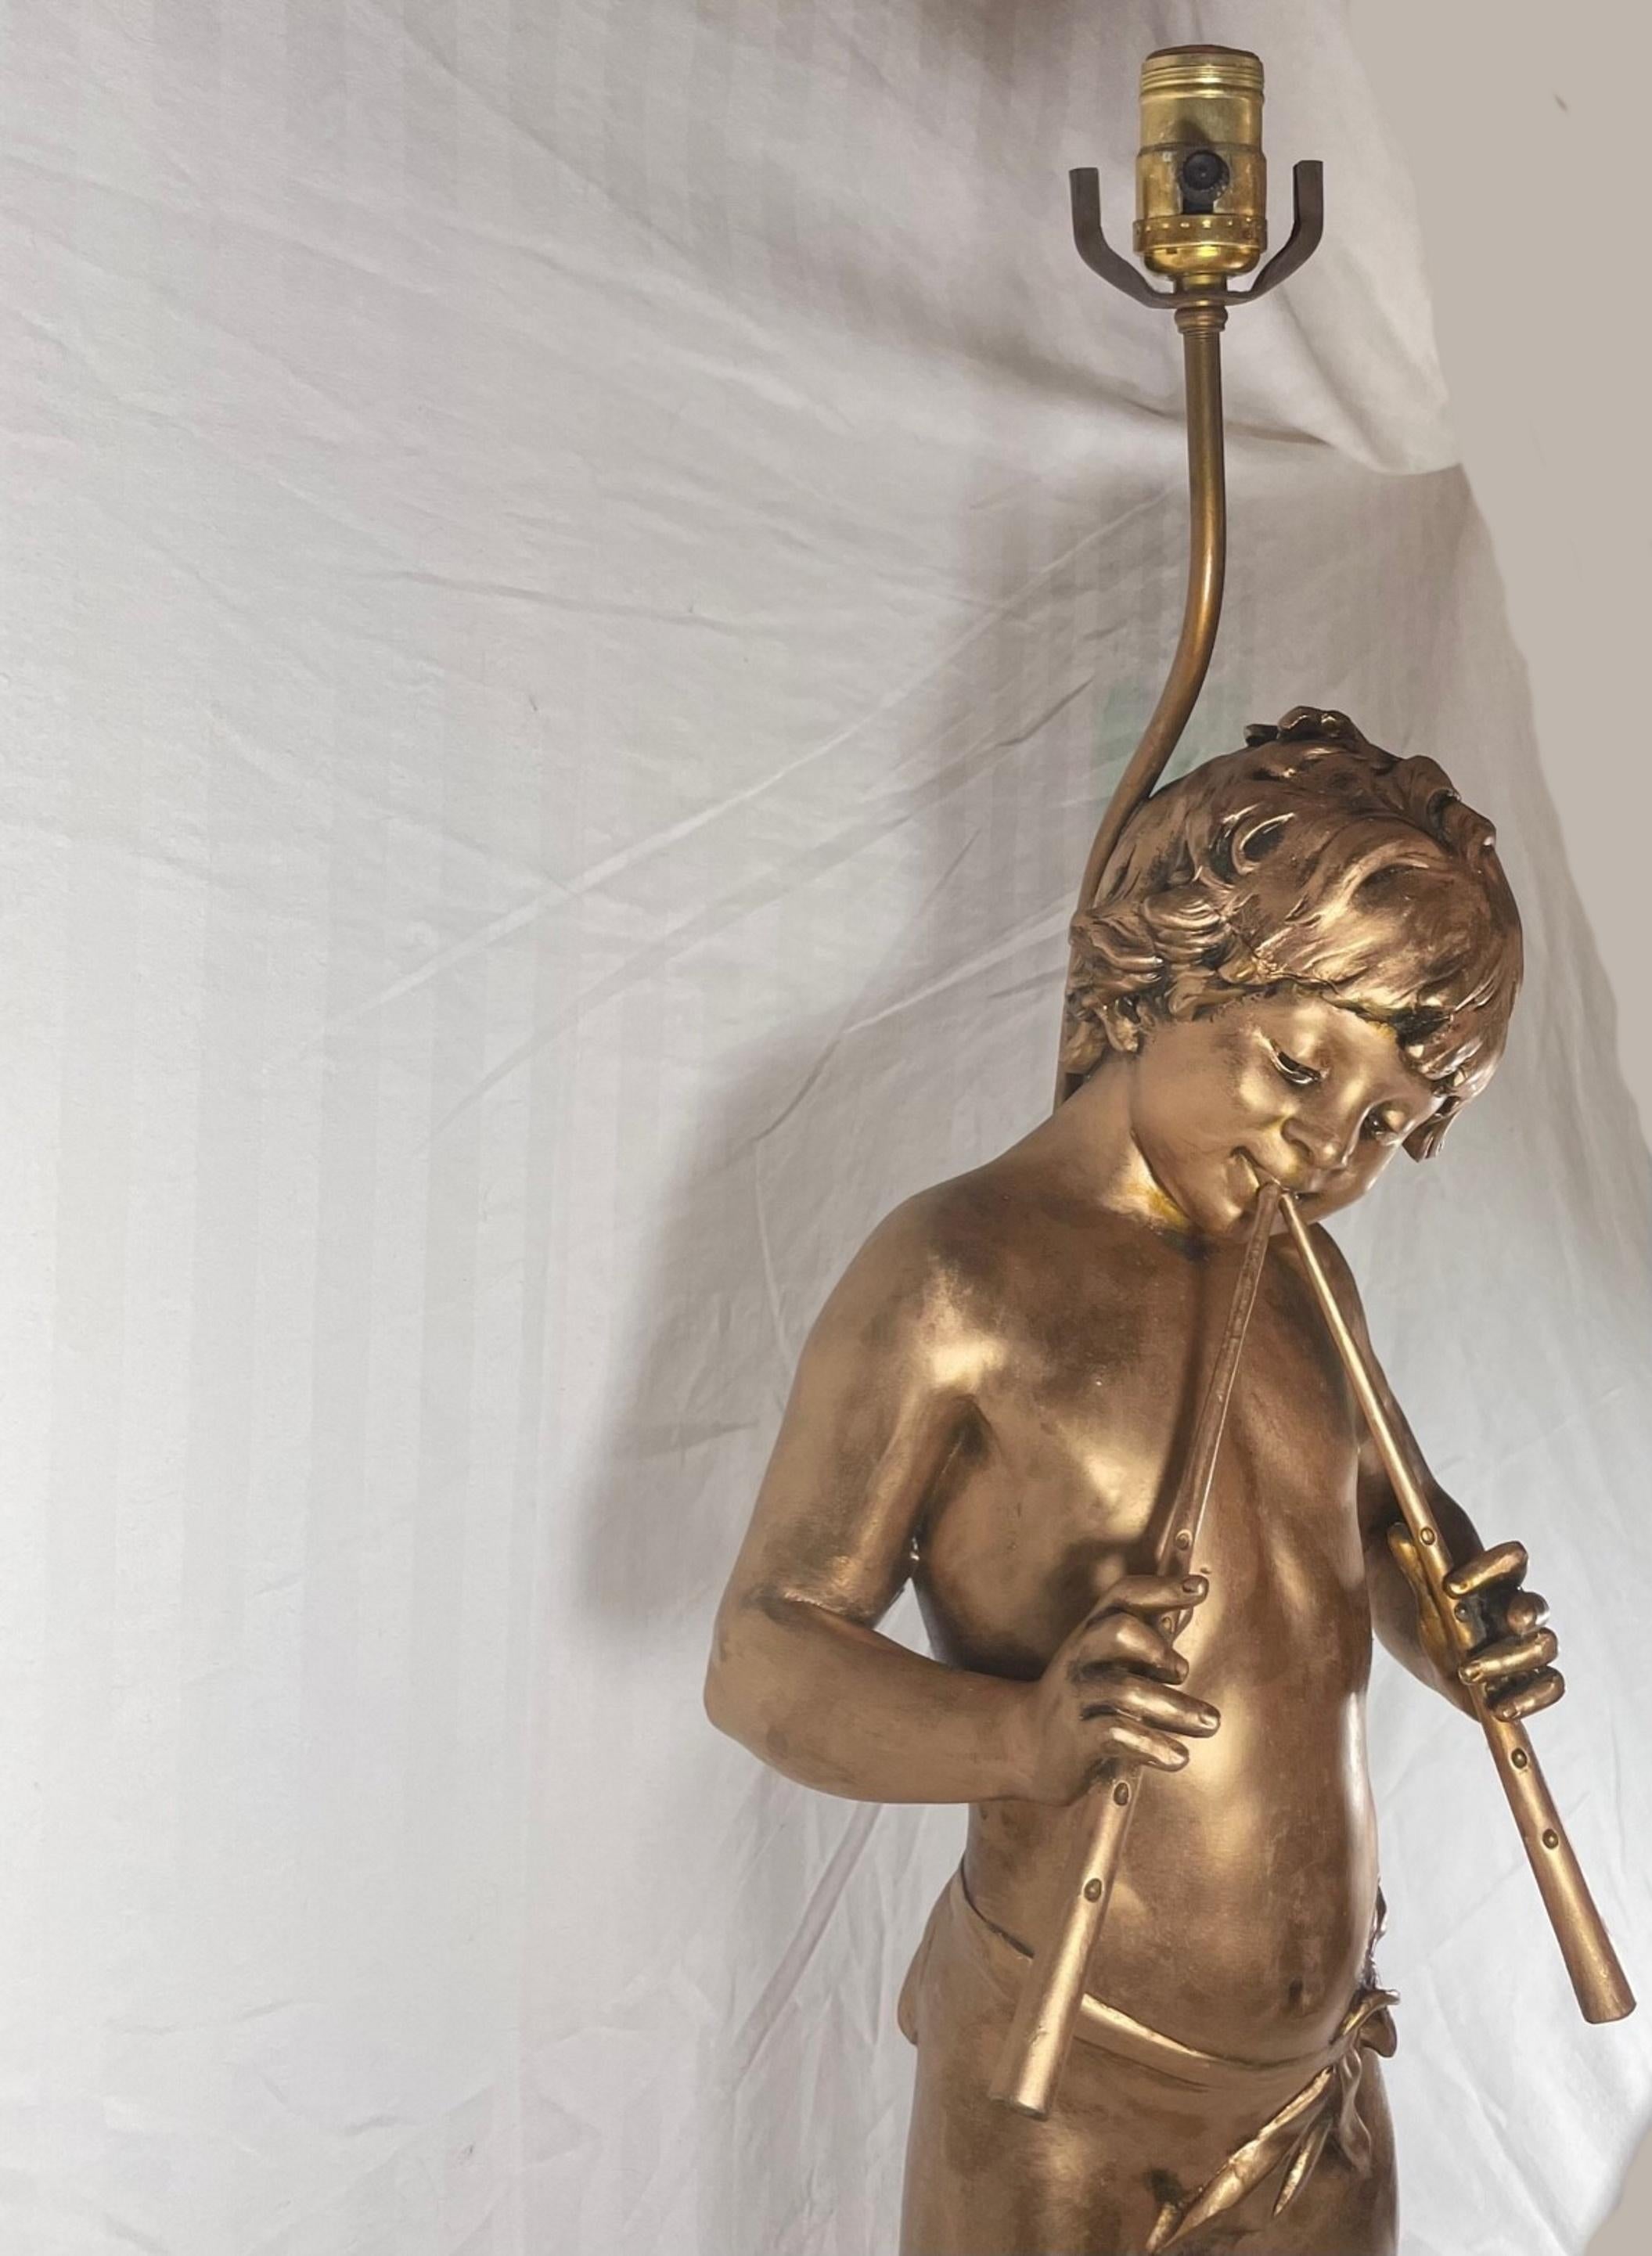 19th Century French Gilt Bronzed Lamp Sculpture “Boy with Flute”, Signed Moreau. For Sale 5